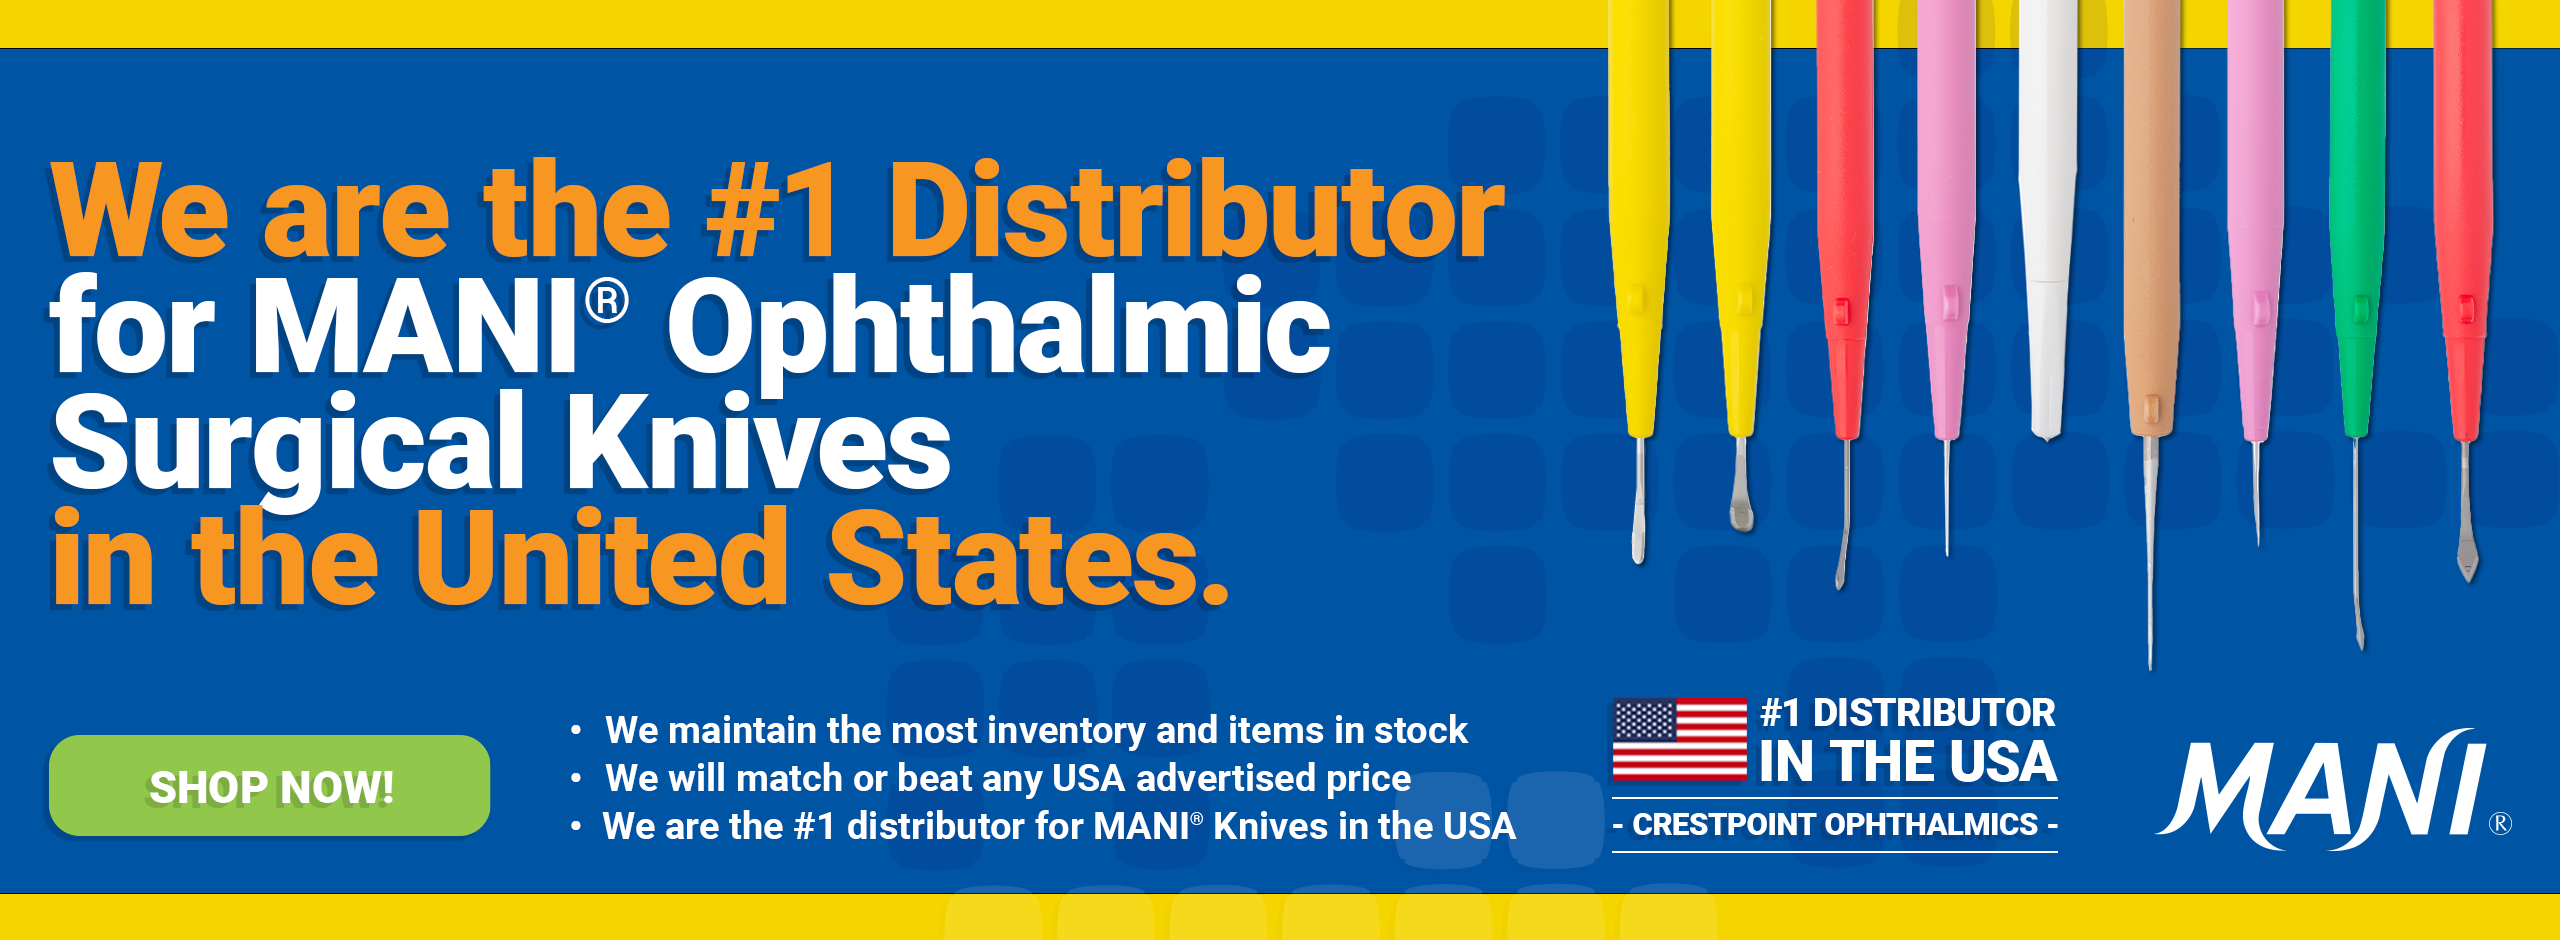 Crestpoint Ophthalmics is the number 1 distributor for MANI Ophthalmic Surgical Knives in the United States